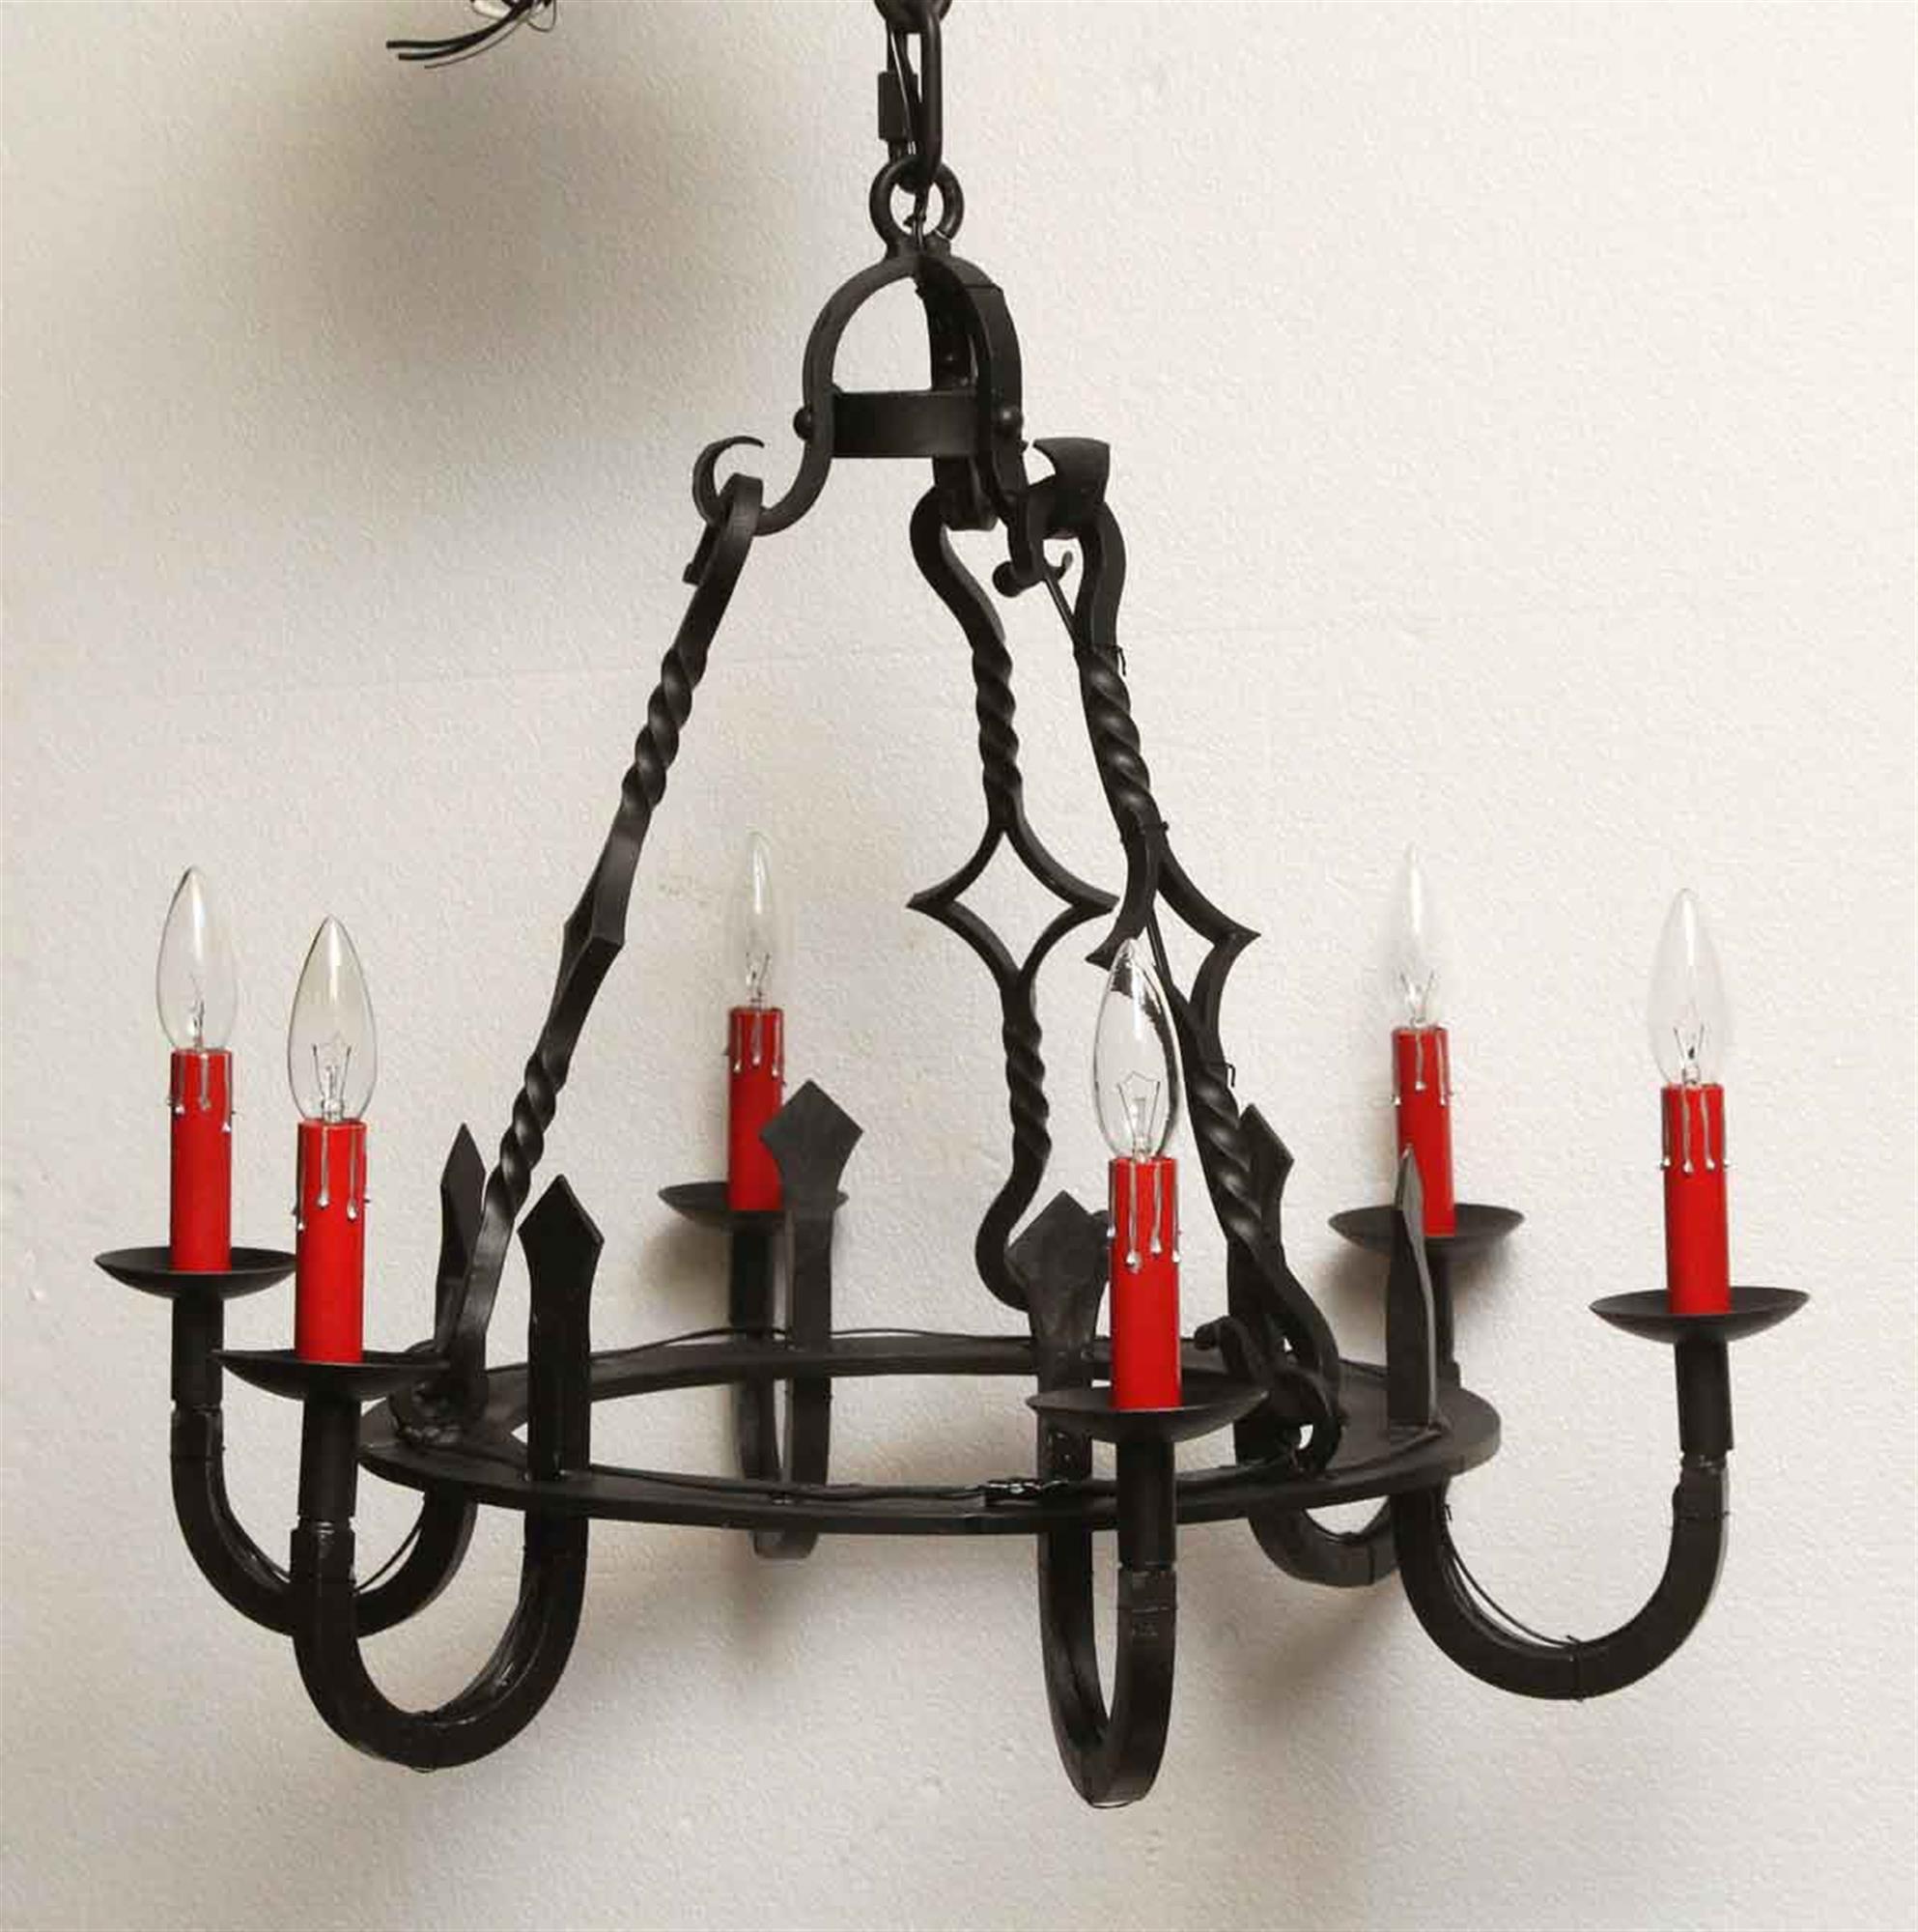 1970s wrought iron Gothic style black chandelier featuring six red candle sleeves. Matching sconces available separately. Please note, this item is located in our Los Angeles, CA location.